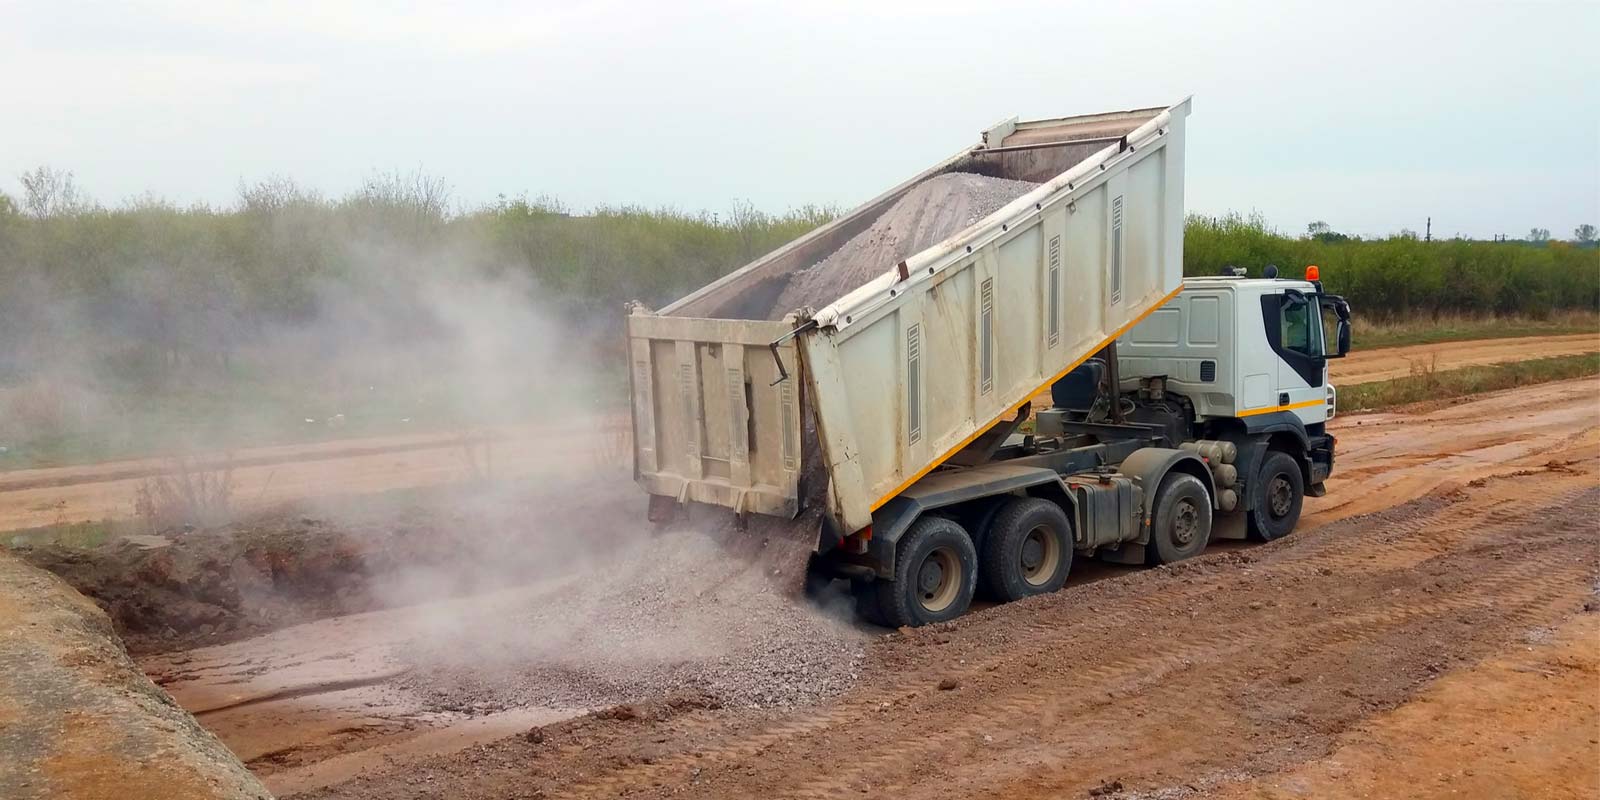 How Many Tons Of Gravel In A Dump Truck